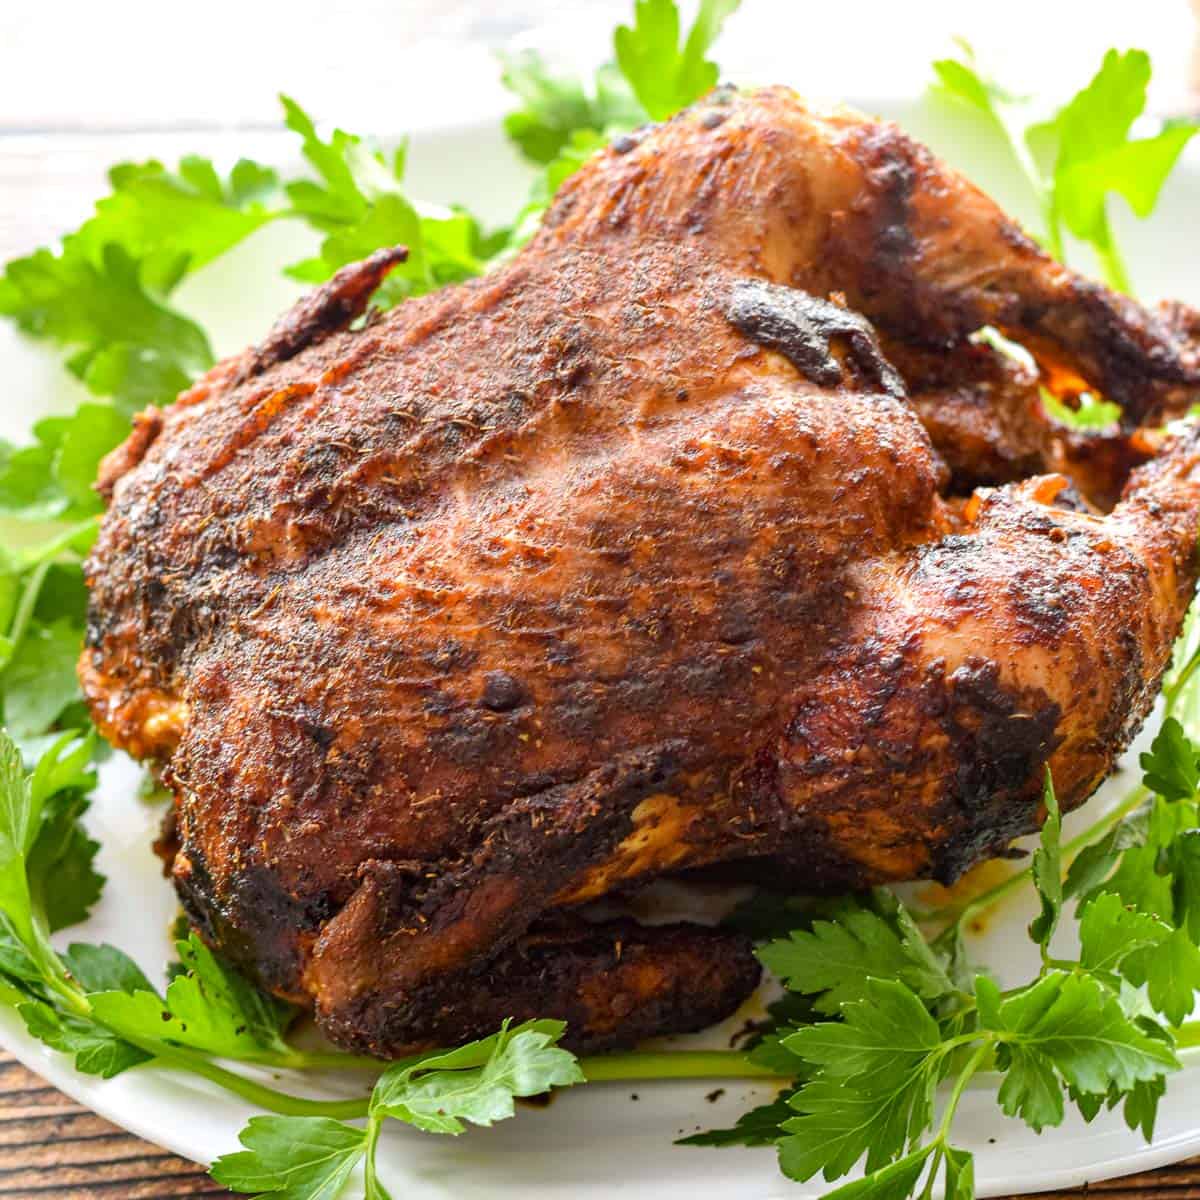 a cooked rotisserie chicken on a white platter surrounded by parsley